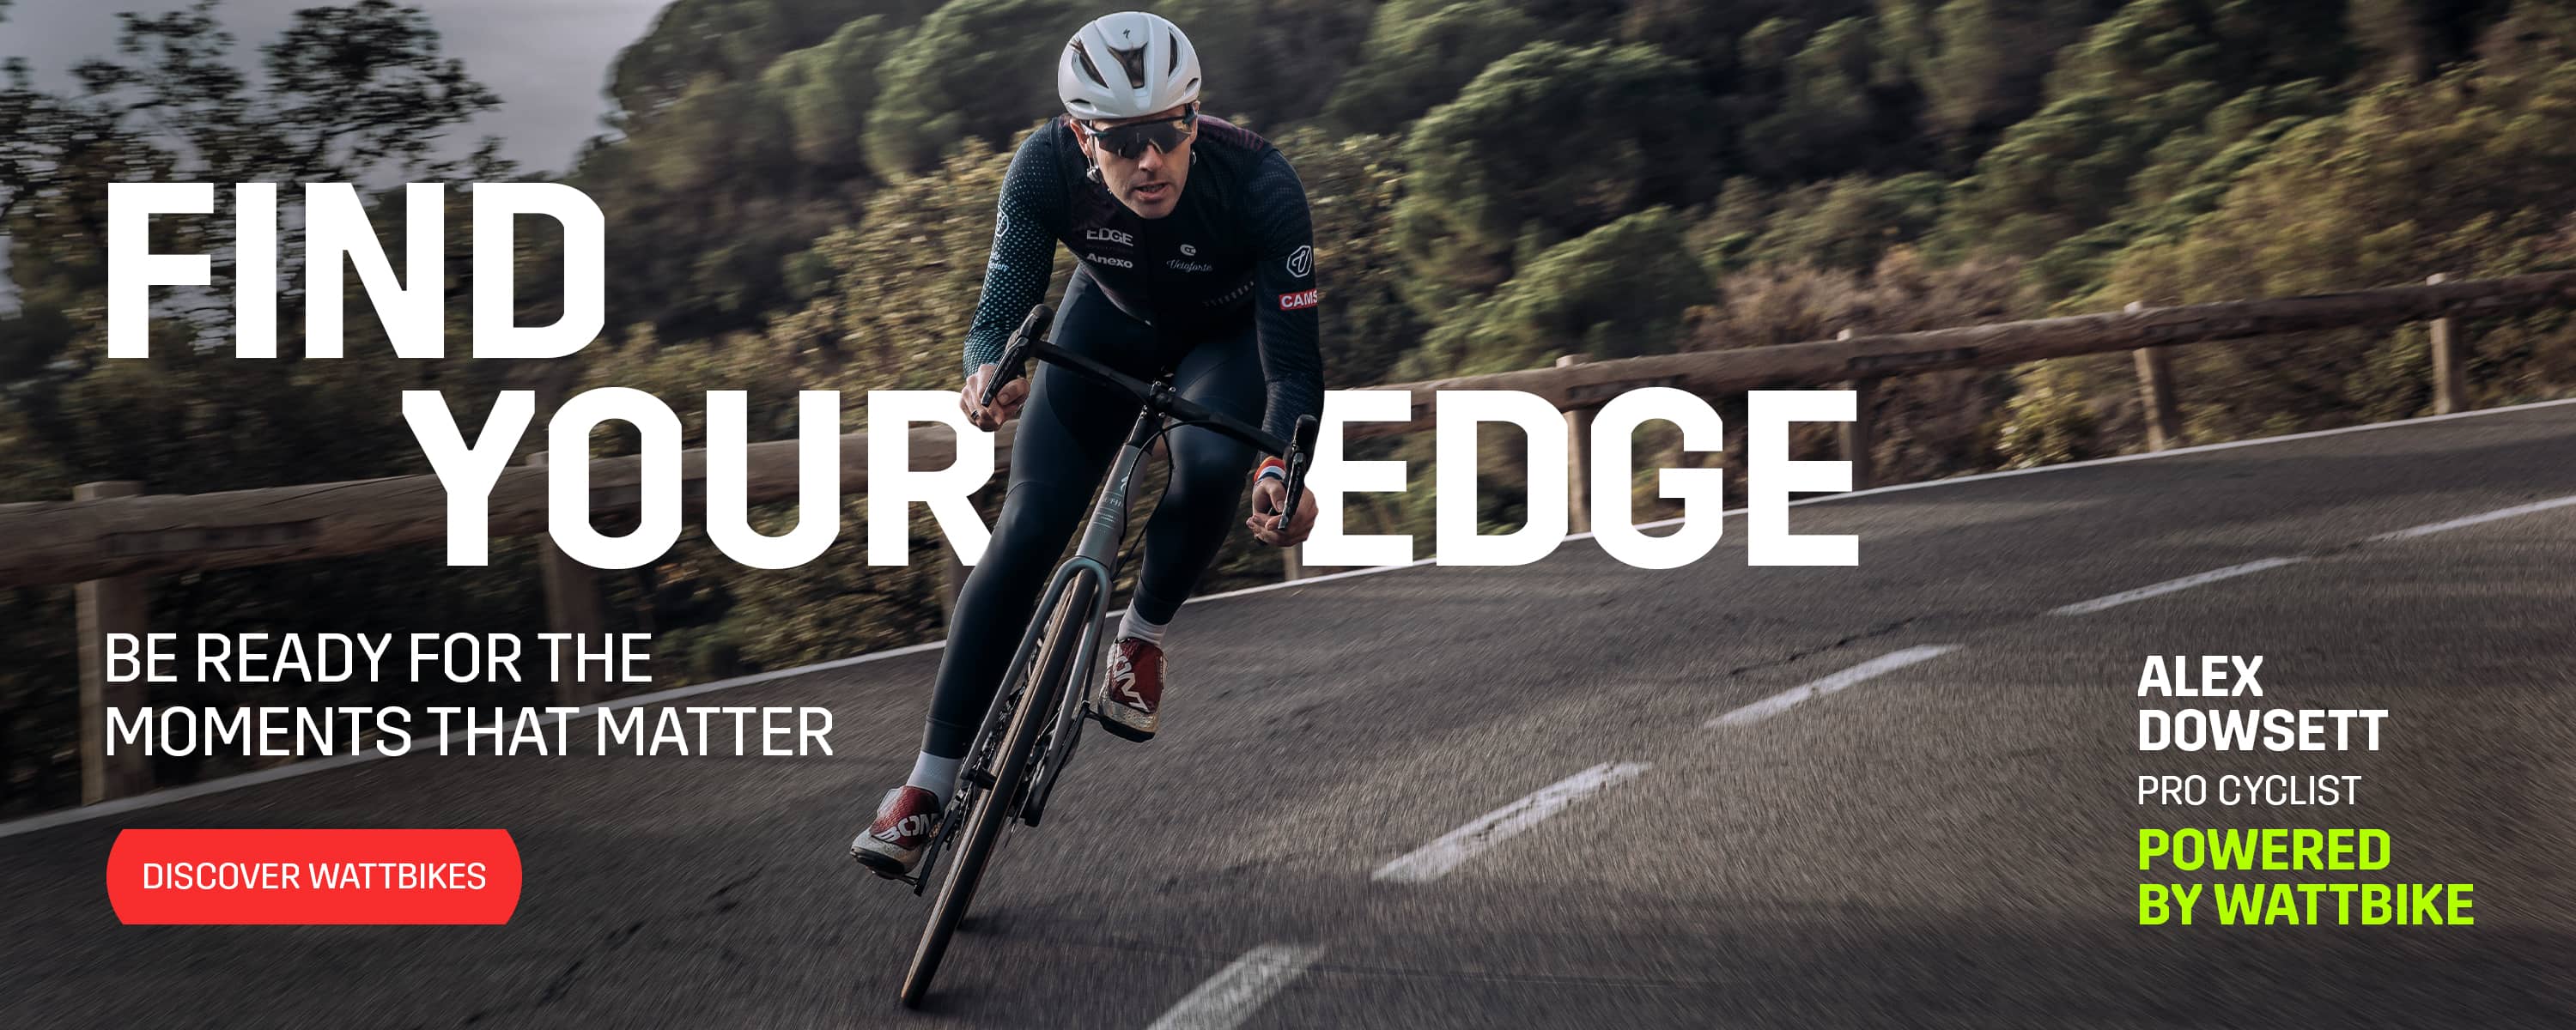 Find your edge - Be ready for the moments that matter. Discover Wattbikes